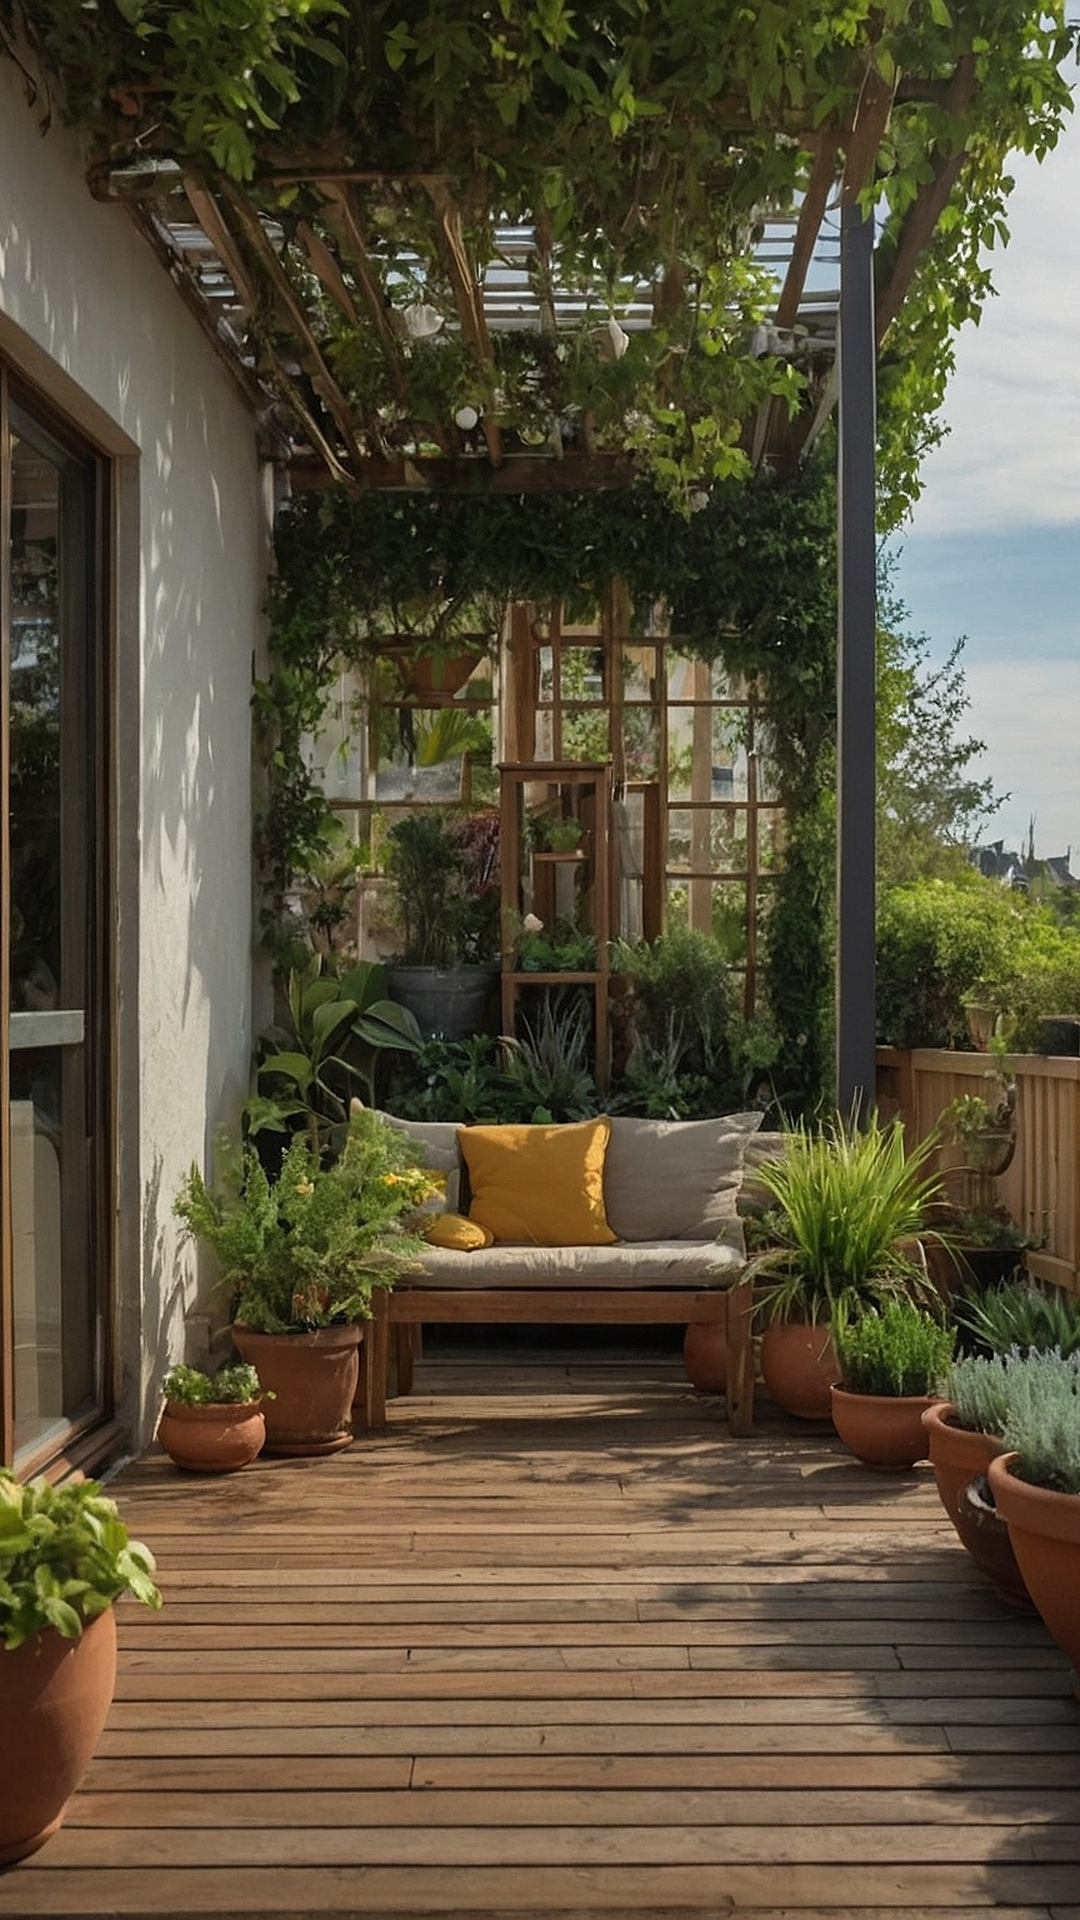 Transforming Small Spaces to Green Oases: Garden Layout Ideas